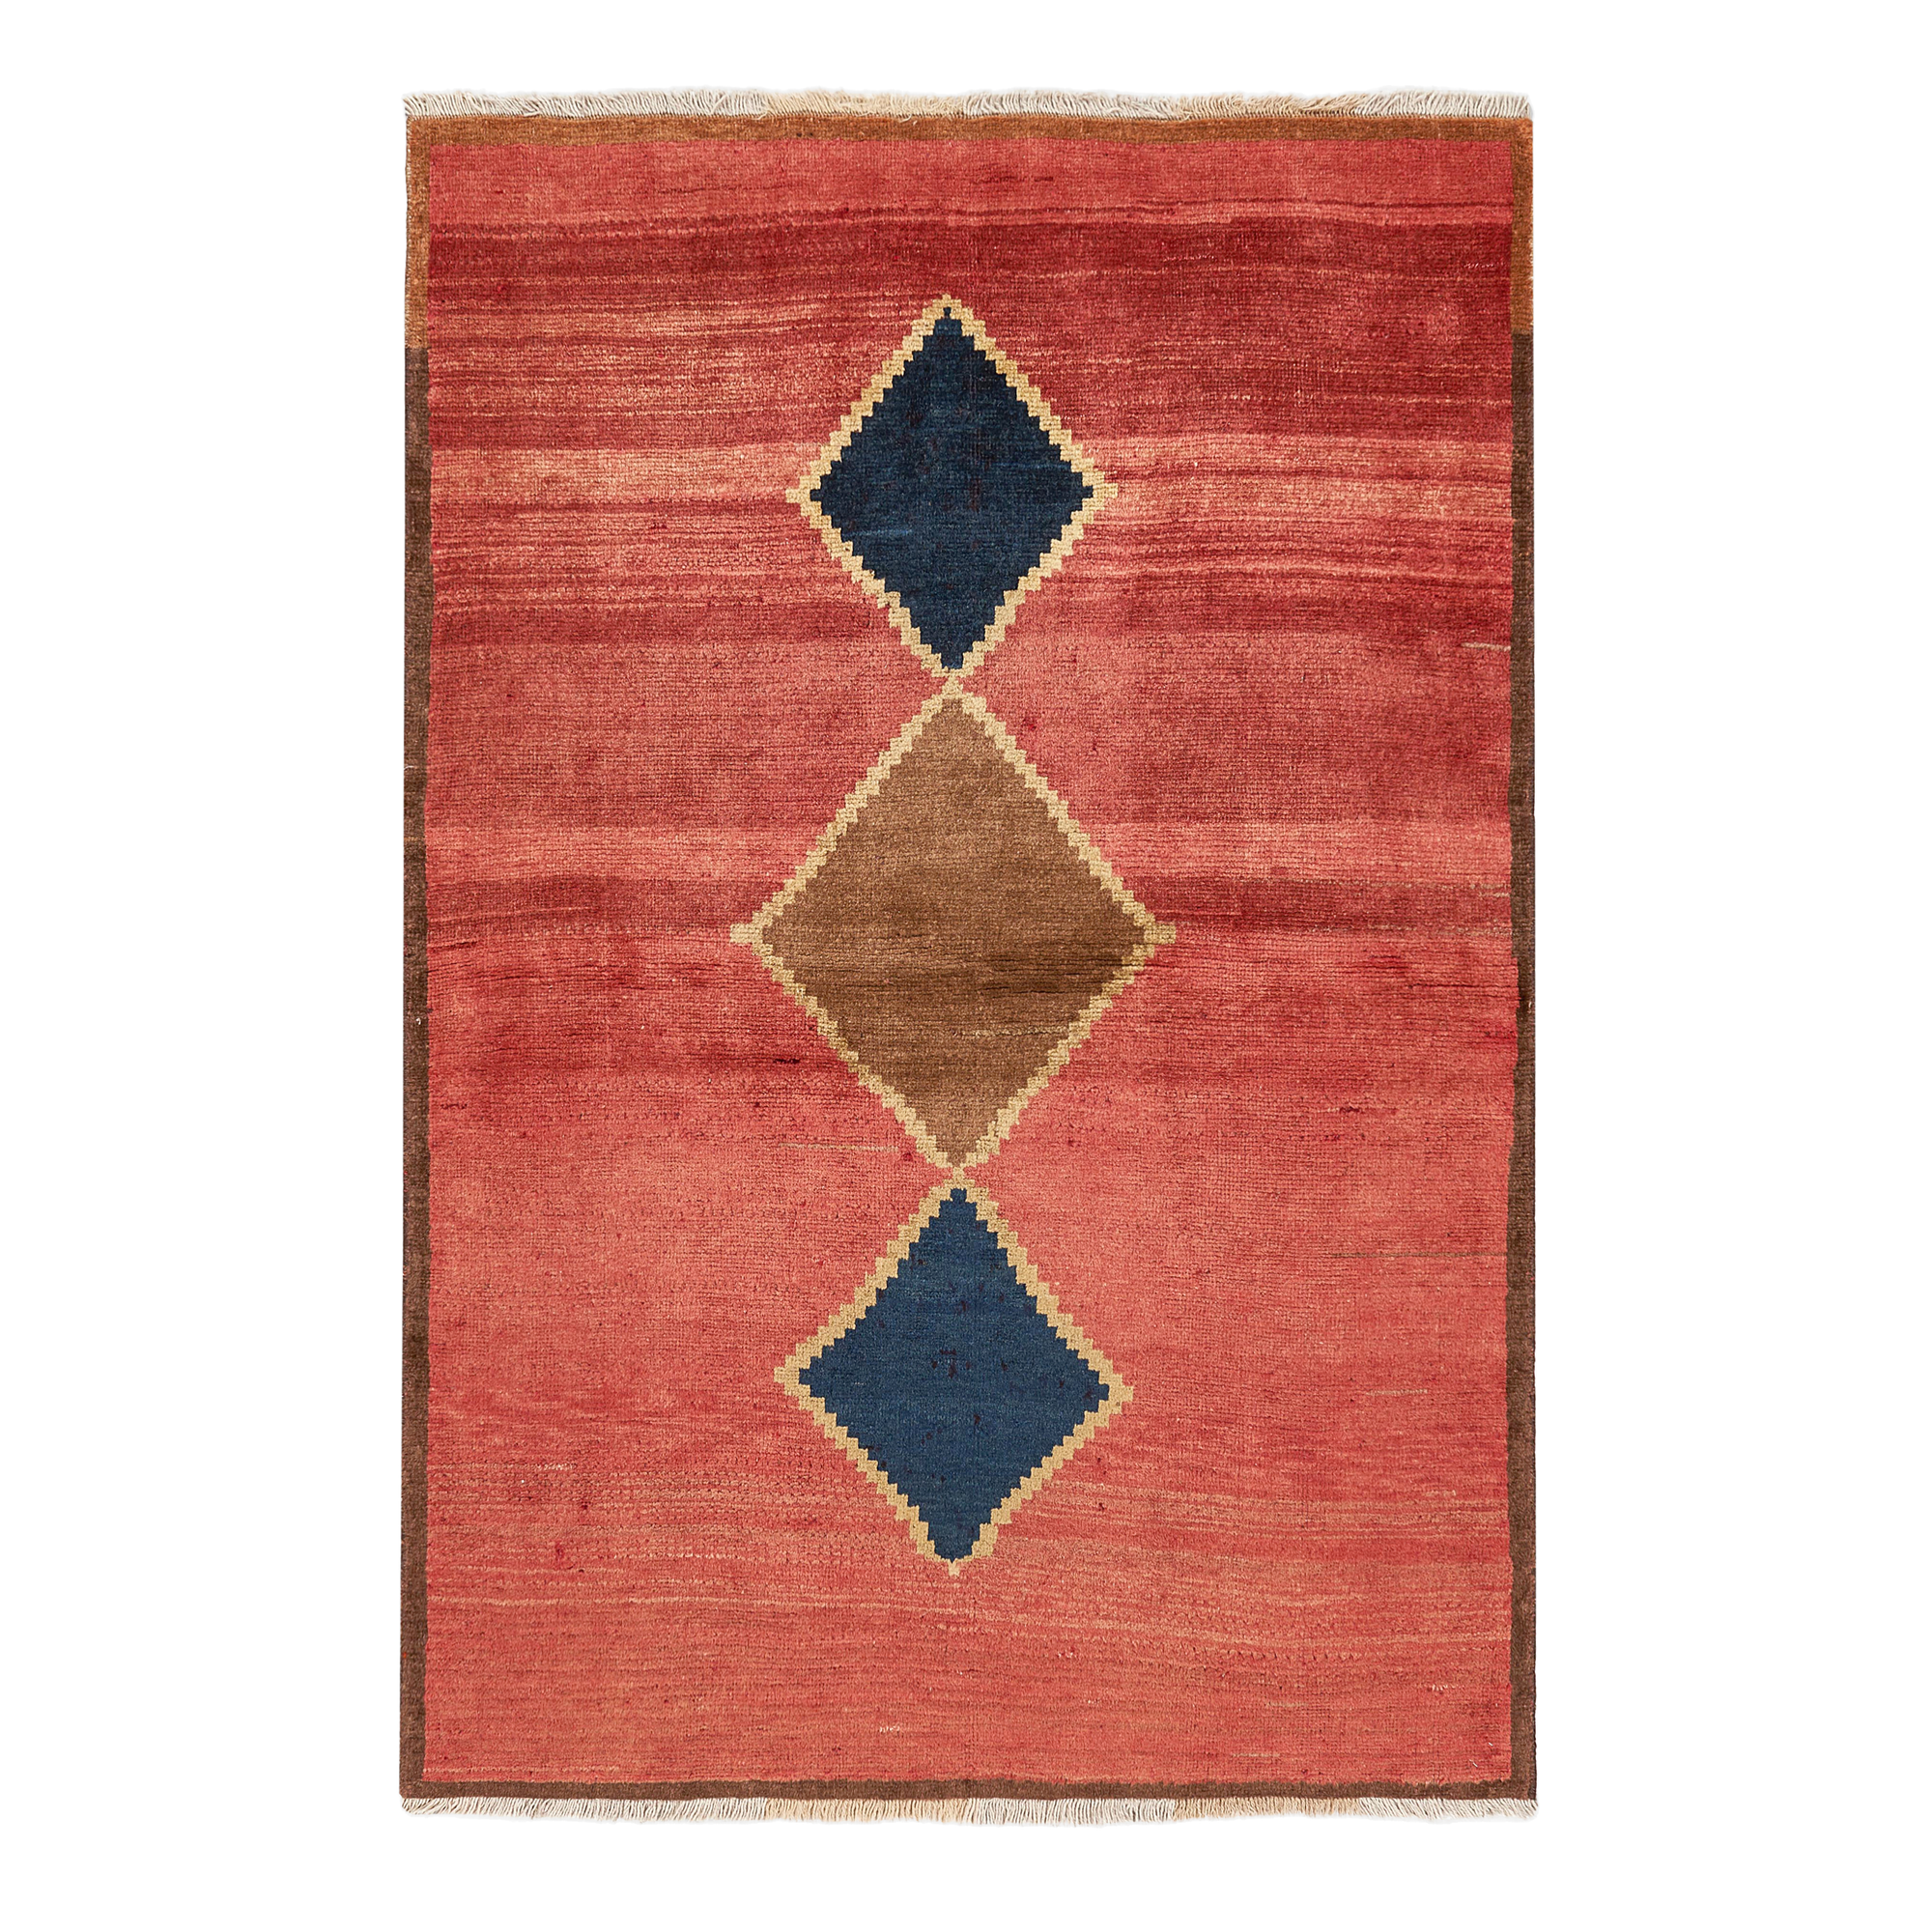 The Naziri Family Private Collection was built by Mohammad Naziri and his wife Lila over the span of five decades spent sourcing rugs from the remote corners of southern Persia.